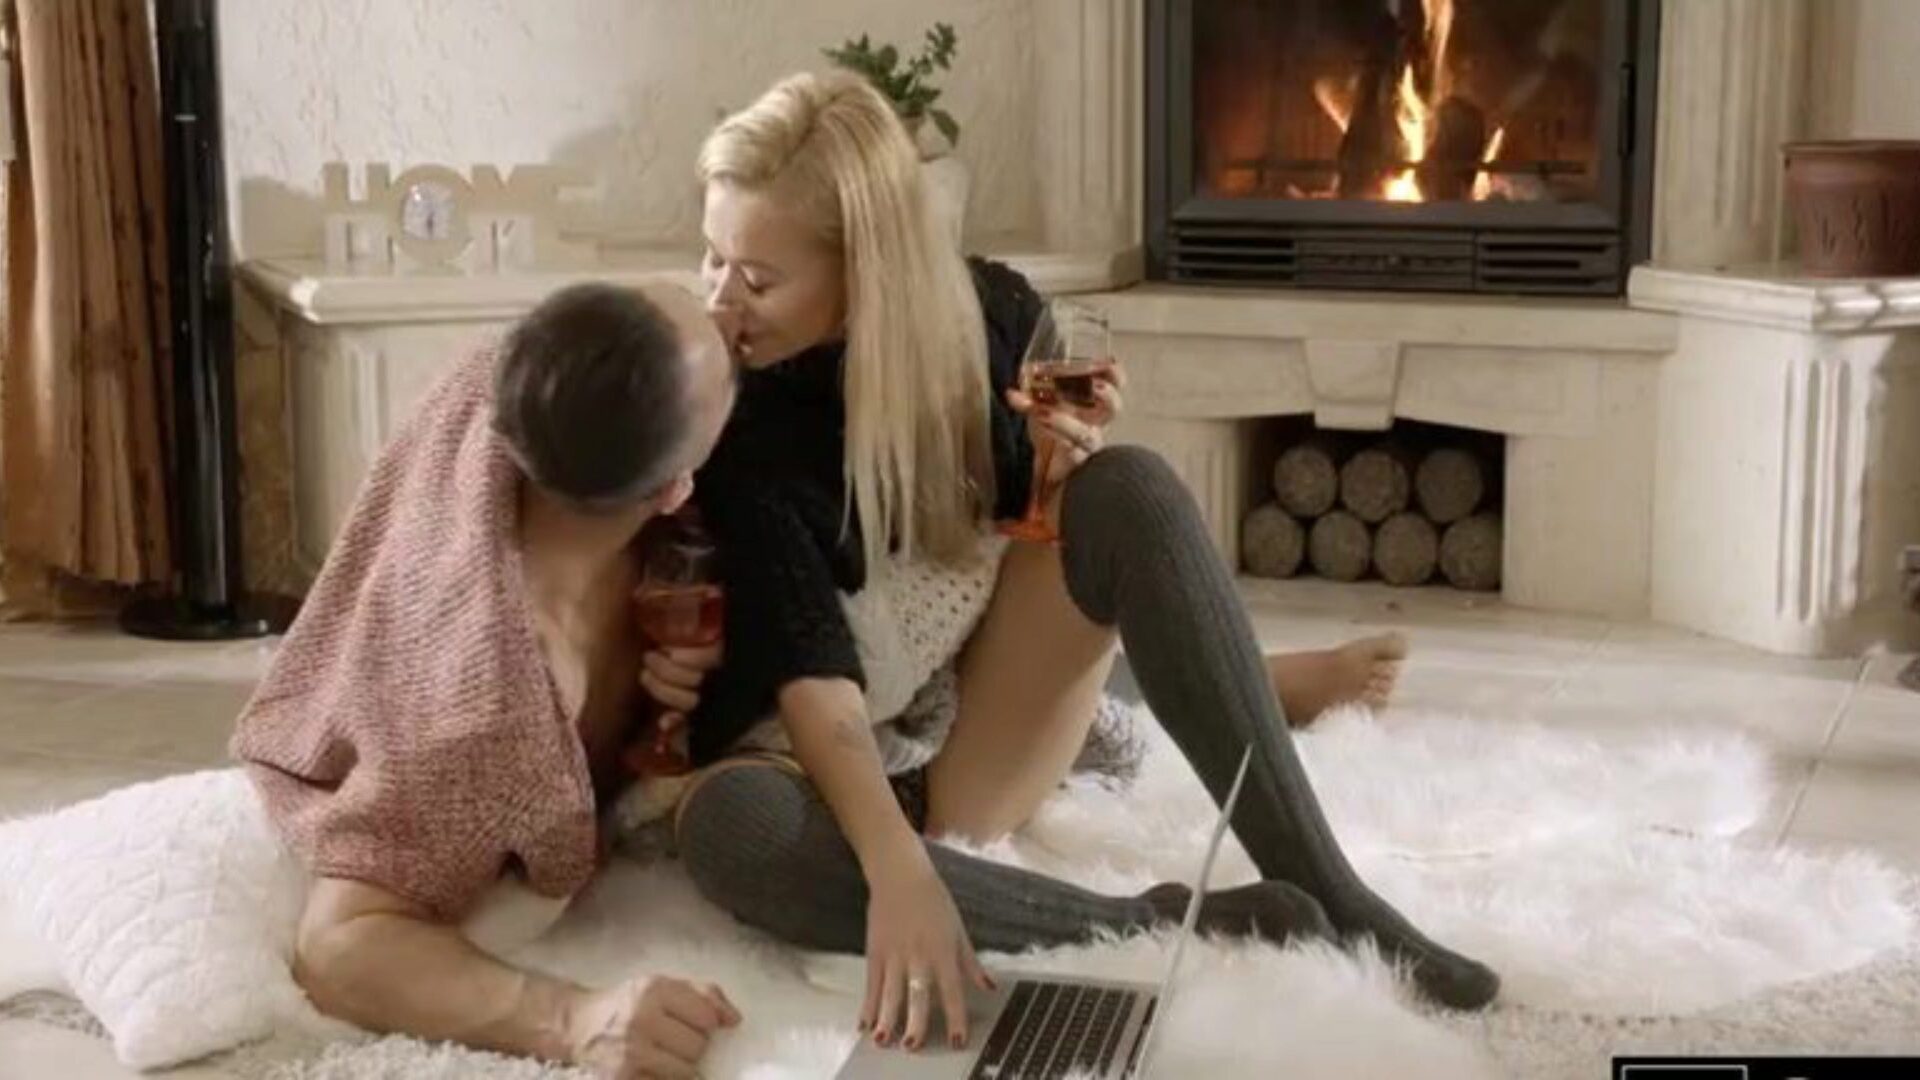 Hot Blondie craves BAE's Wang by the Fire Having passionate sexy time by the fire - on some animals fluffy skin - has always been a receive to have on many romantic dame's bucket list. This mother I'd like to pulverize is having hers right now!